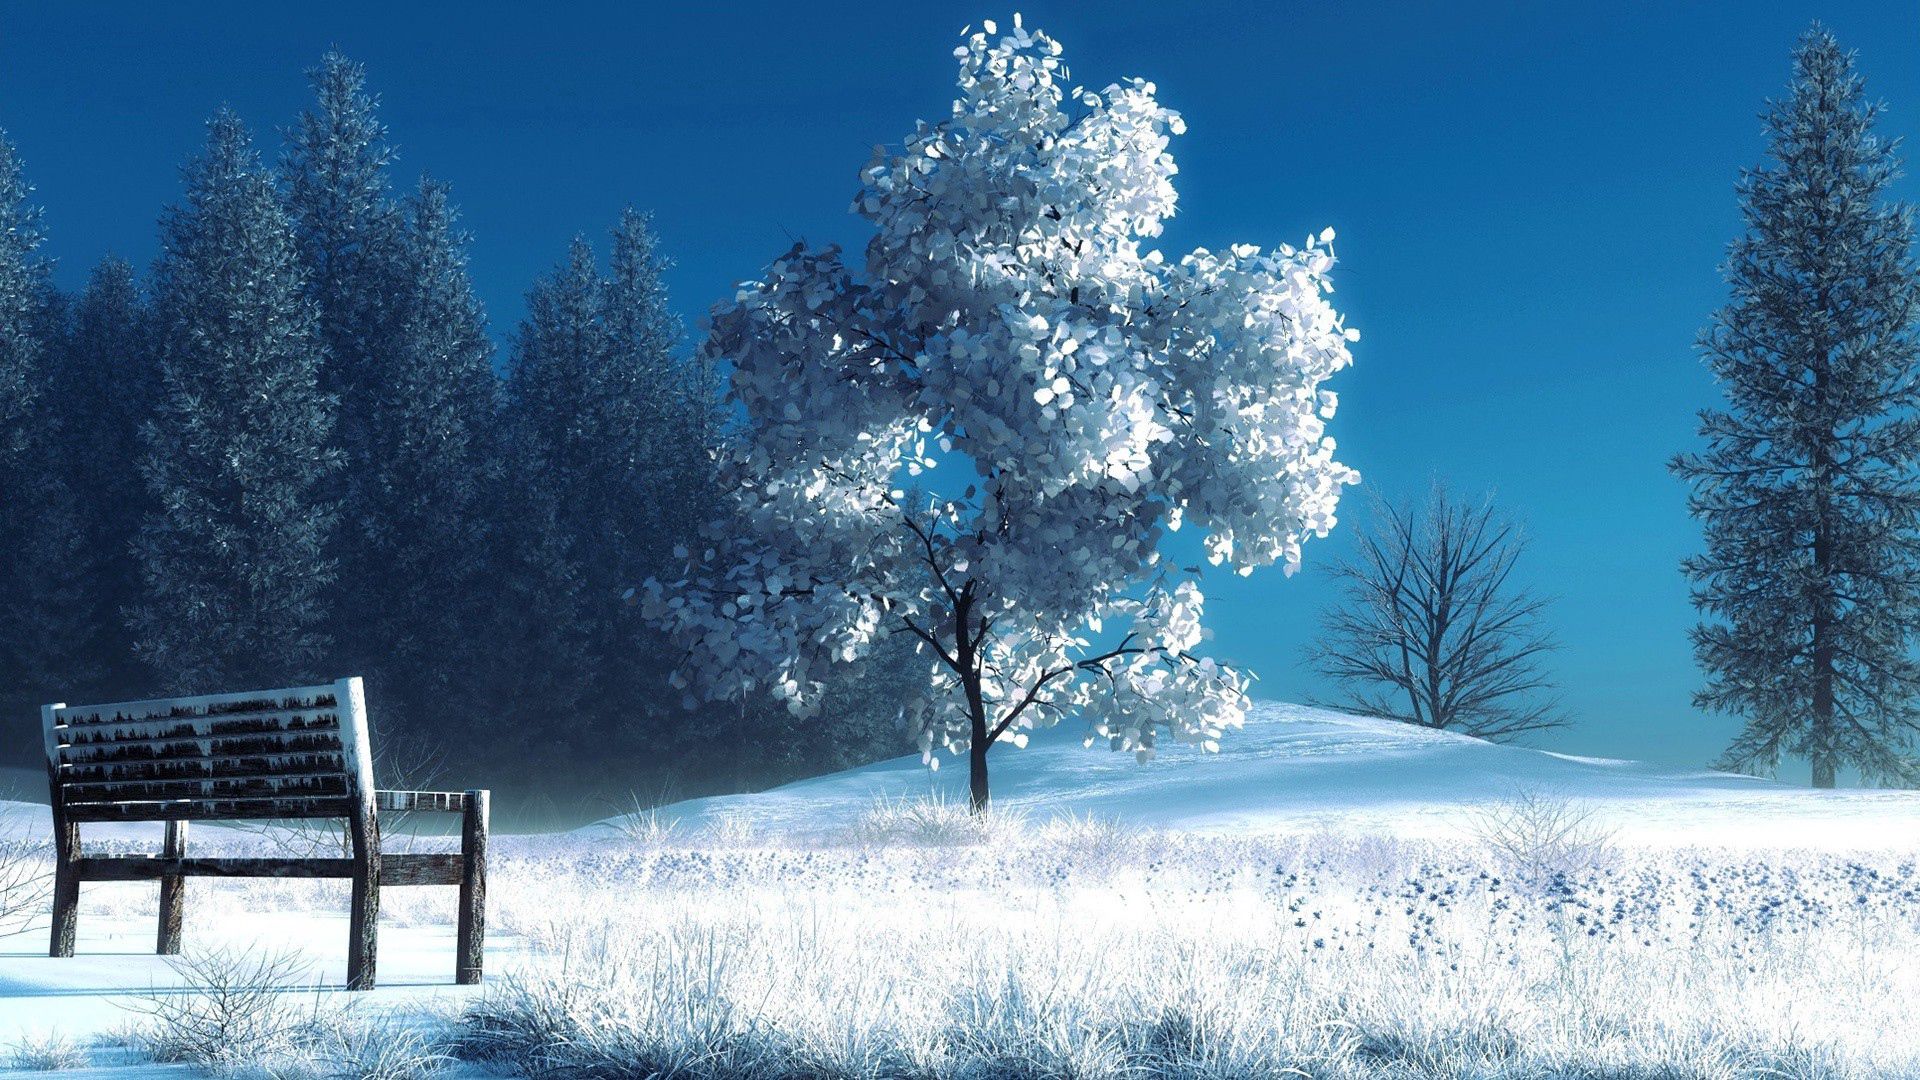 Download 1920x1080 winter, landscape, nature, snow, bench, trees wallpaper,...